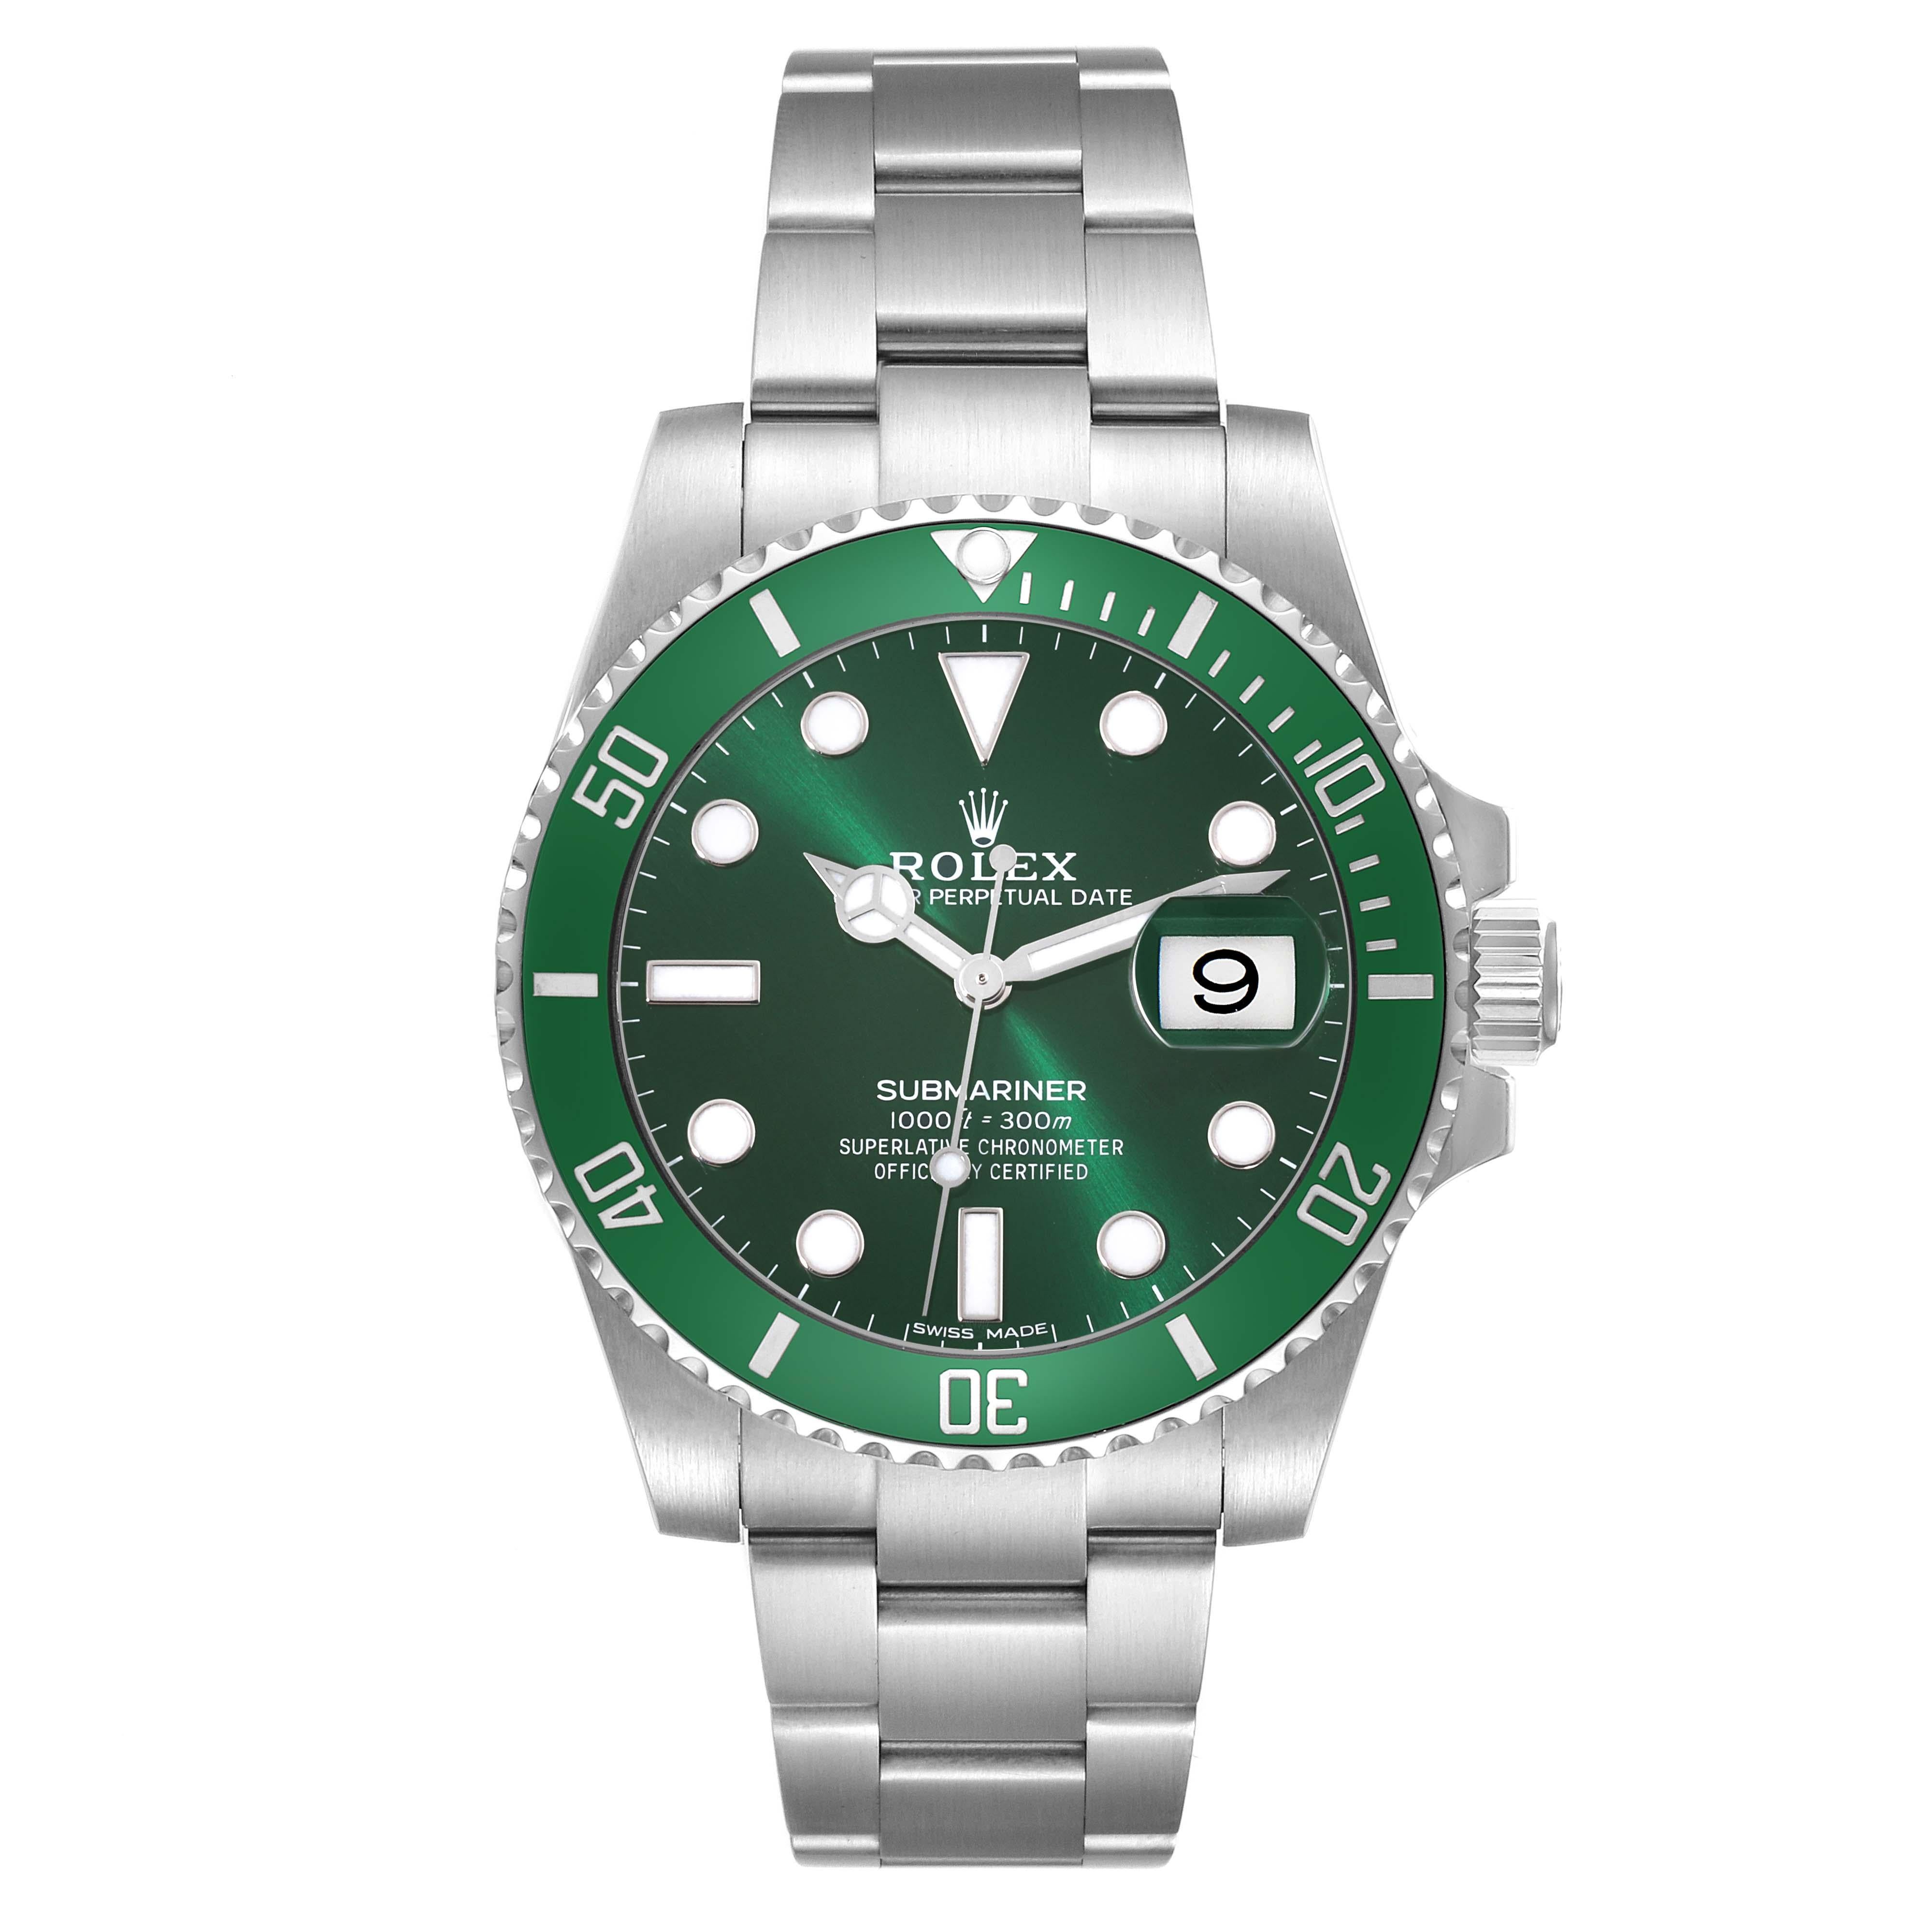 Rolex Submariner Hulk Green Dial Steel Mens Watch 116610LV Box Card. Officially certified chronometer automatic self-winding movement. Oyster case 40 mm in diameter. Rolex logo on the crown. Special time-lapse unidirectional rotating green ceramic